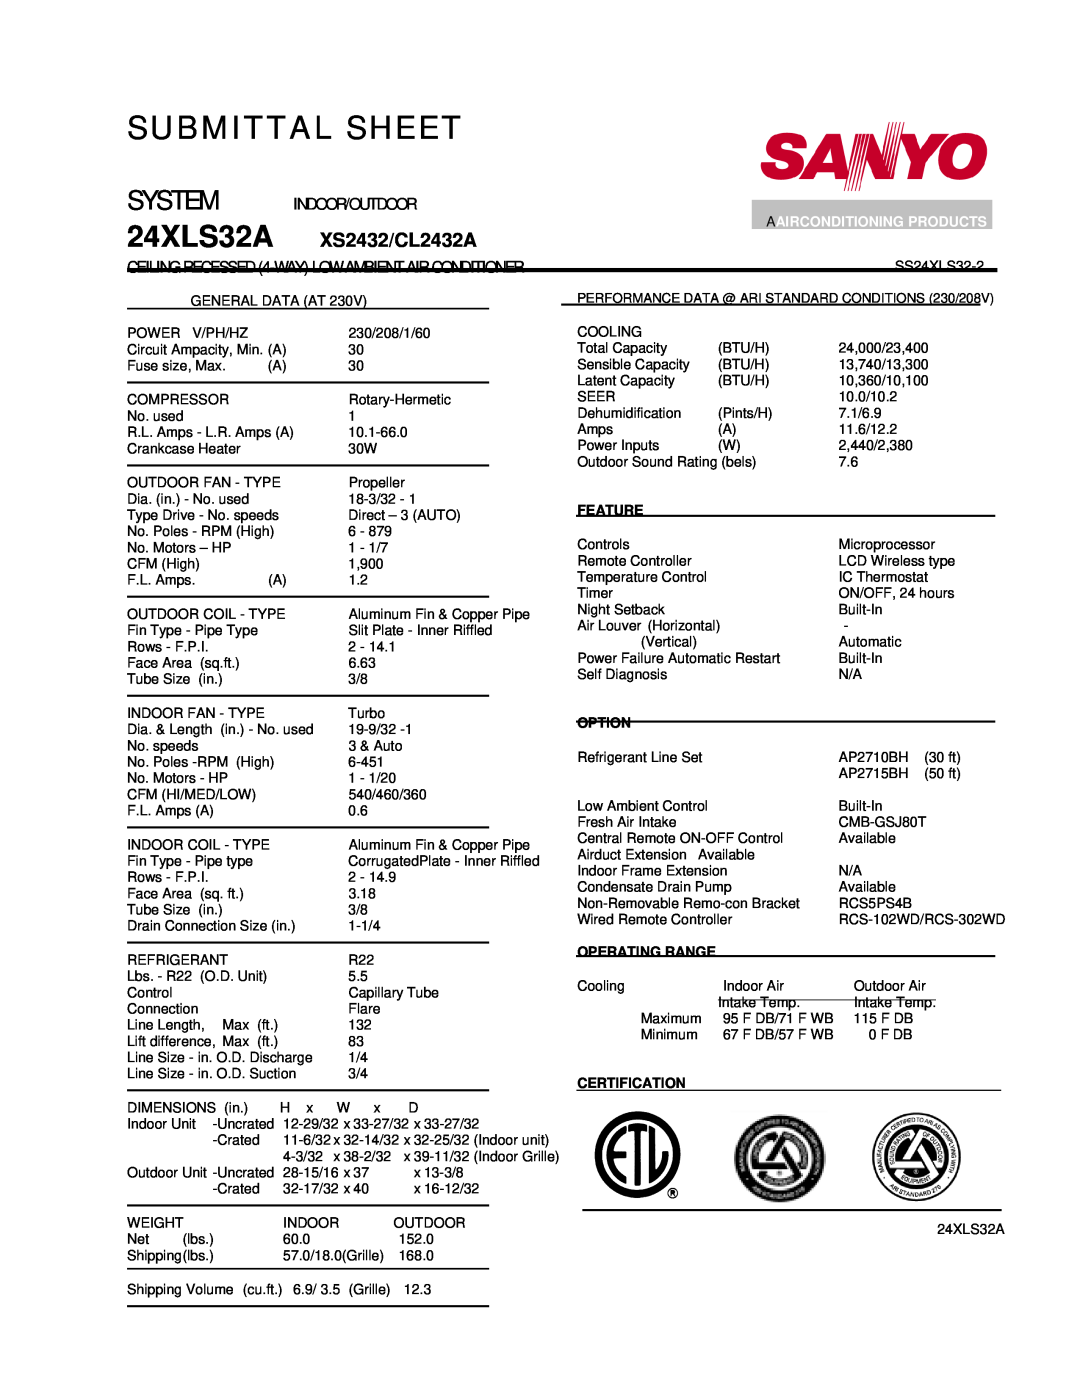 Sanyo CXS2432 CEILING RECESSED 4-WAYLOW AMBIENT AIR CONDITIONER, Aairconditioning Products, Submittal Sheet, 24XLS32A 